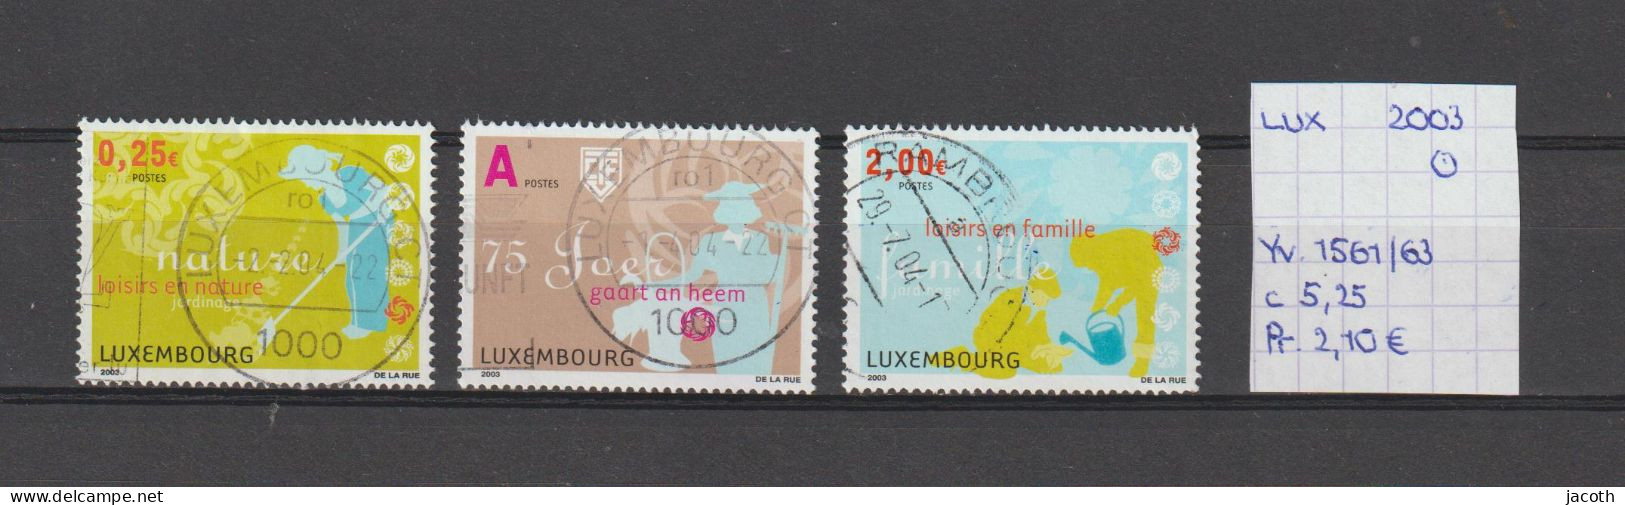 (TJ) Luxembourg 2003 - YT 1561/63 (gest./obl./used) - Used Stamps